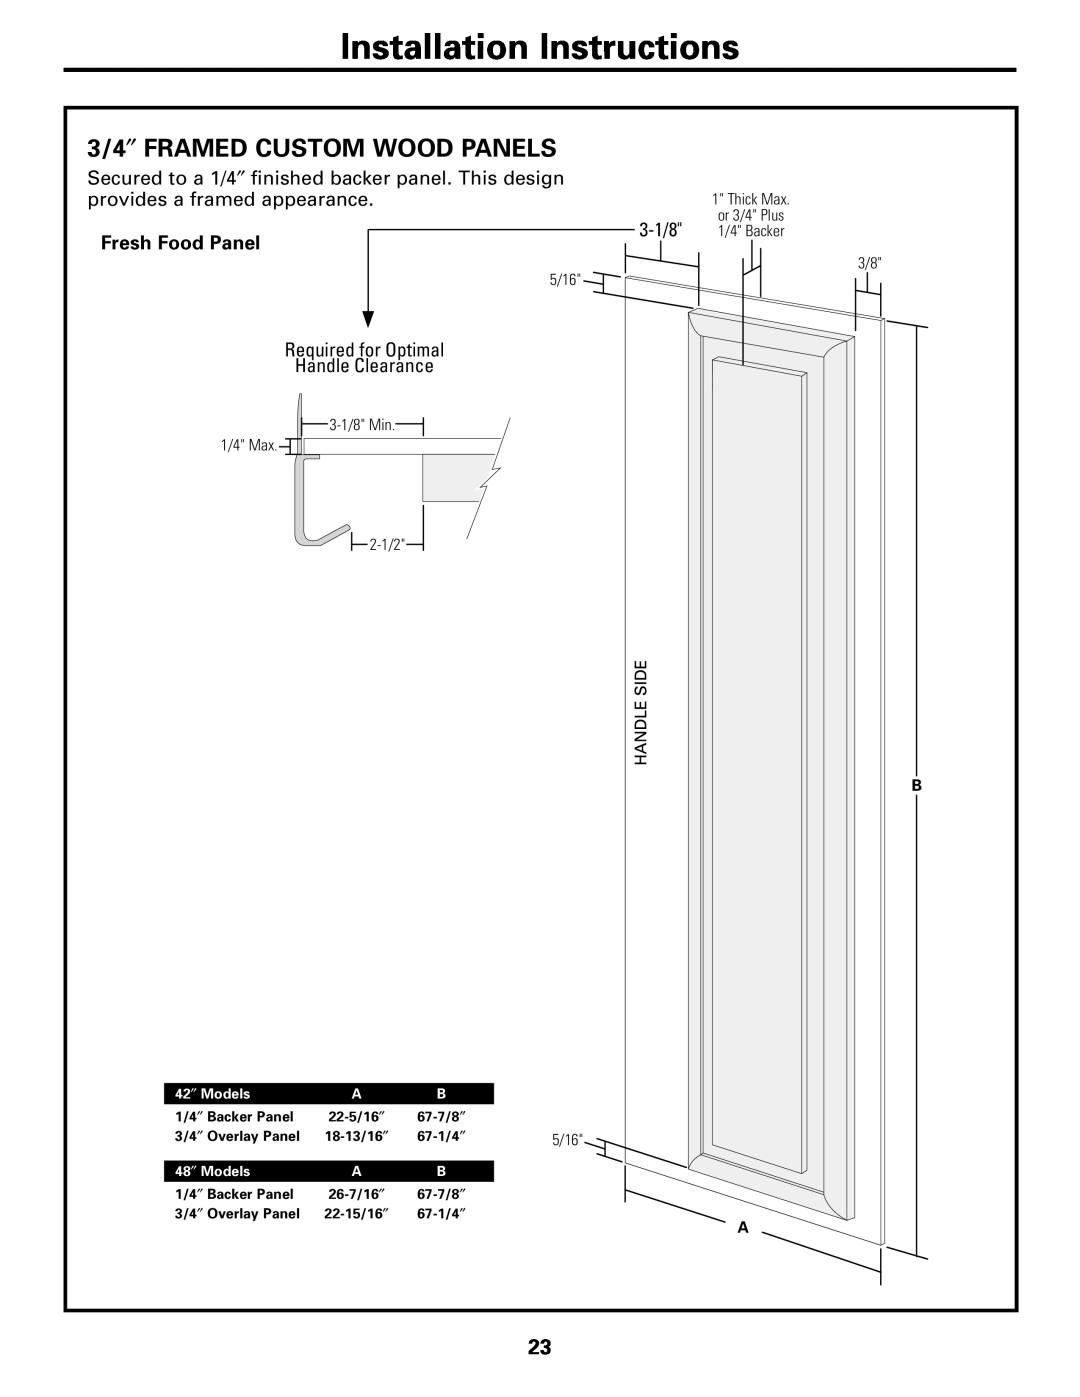 GE 48, 42 3/4″ FRAMED CUSTOM WOOD PANELS, Installation Instructions, Fresh Food Panel, 3-1/8, Required for Optimal, 5/16 